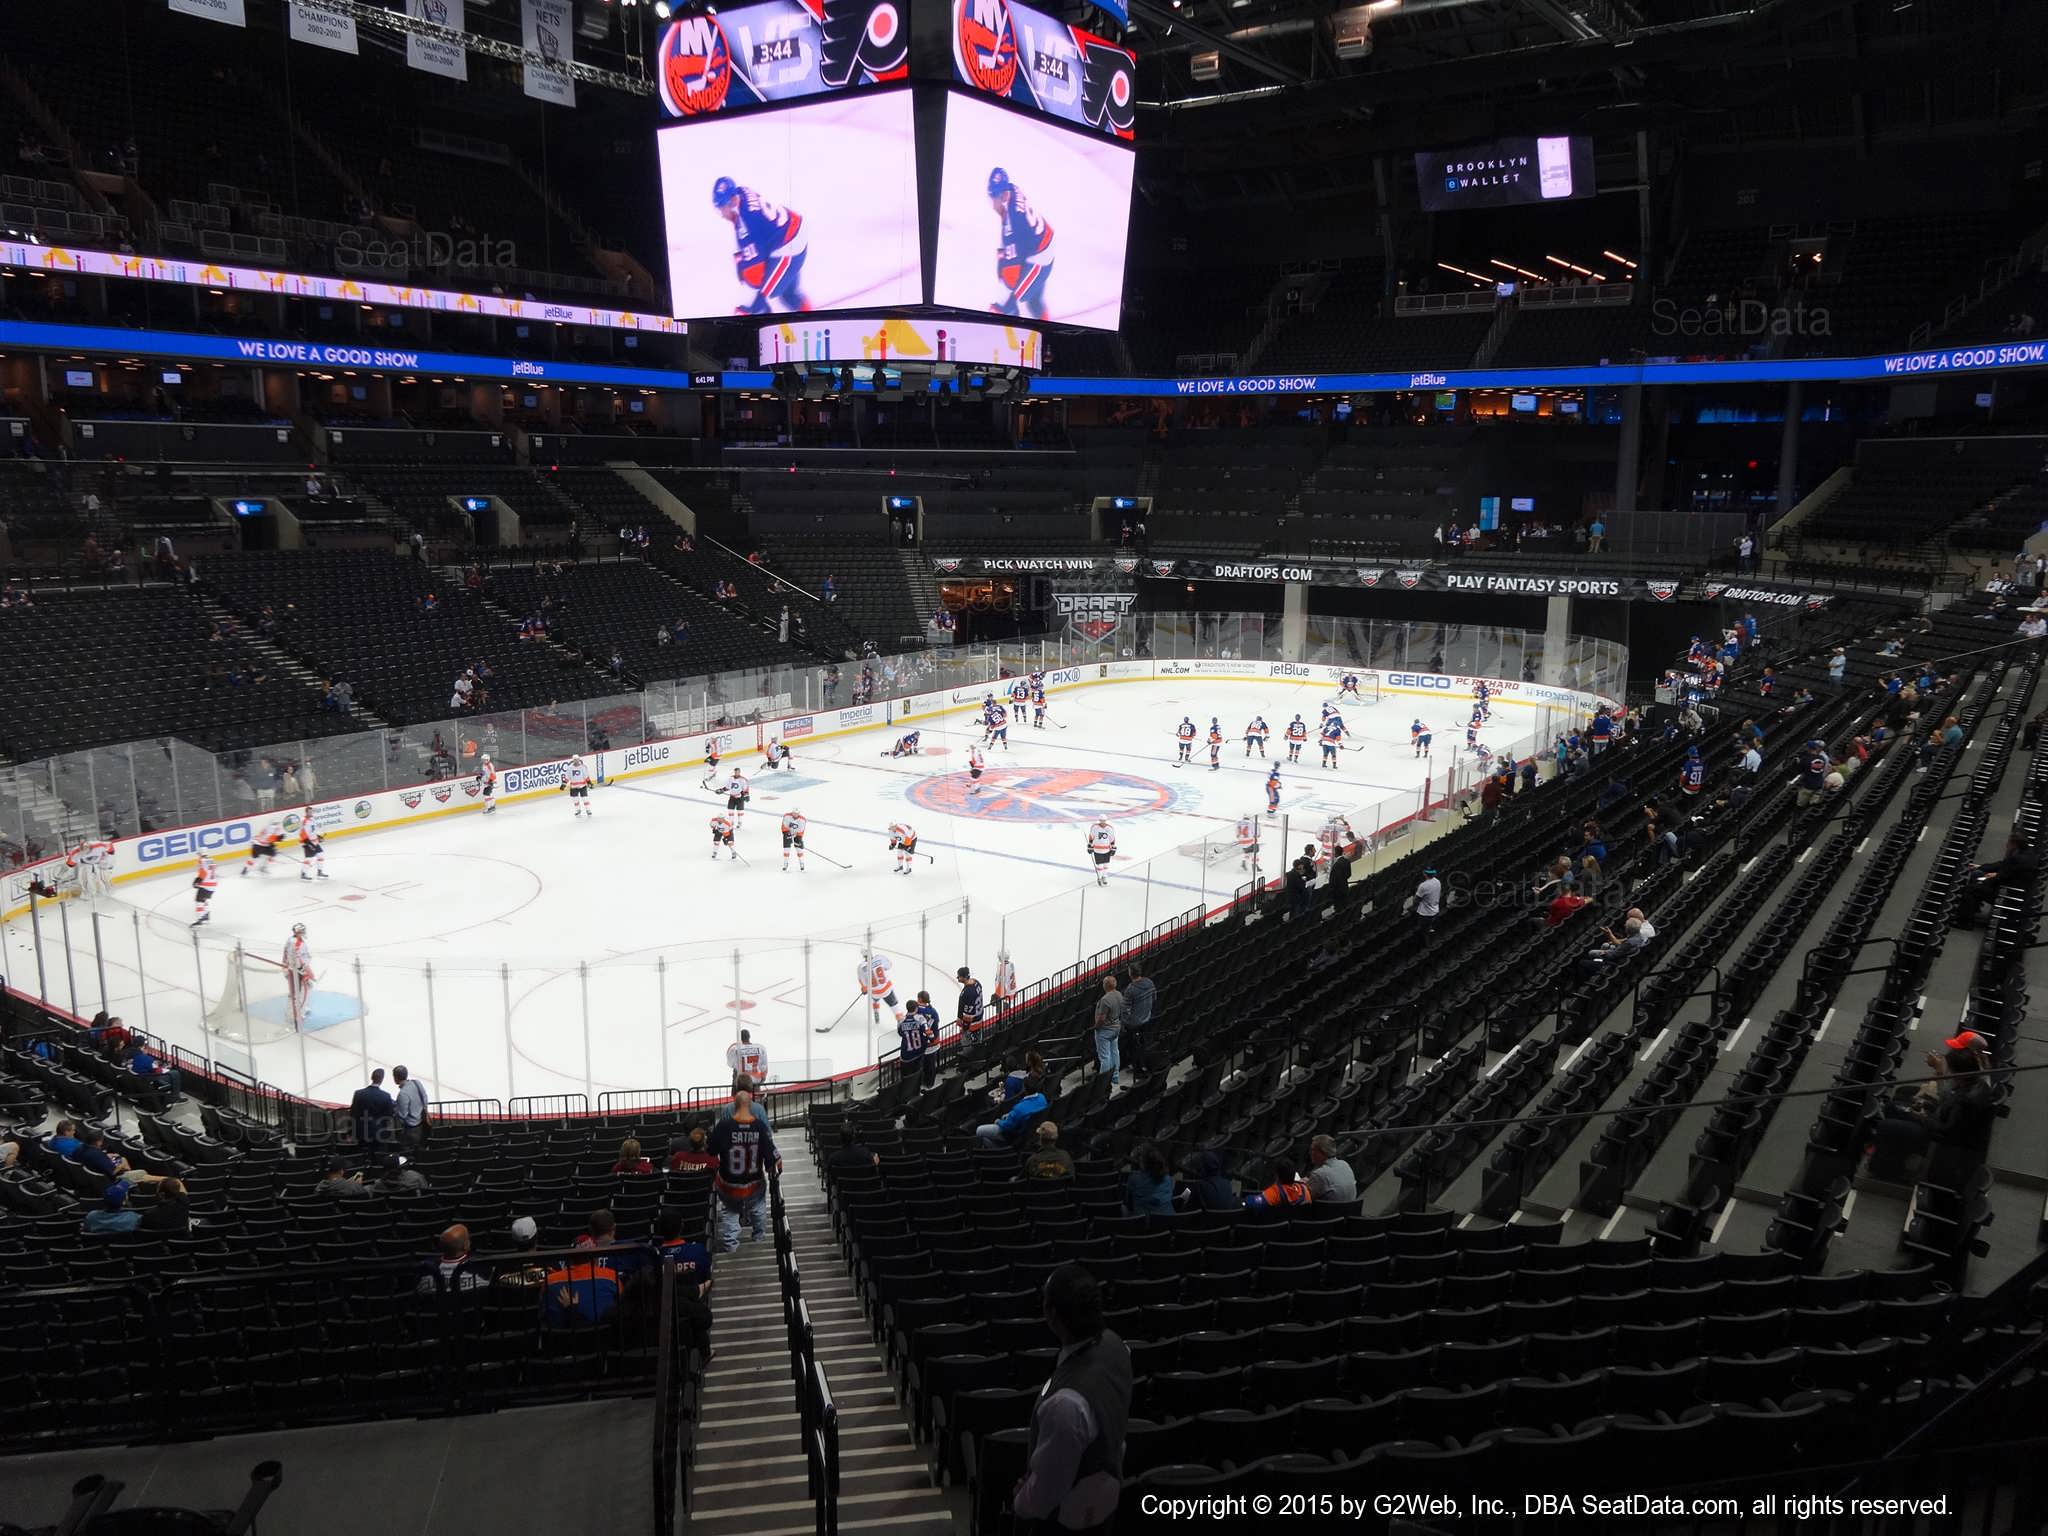 Seat View from Section 112 at the Barclays Center, home of the New York Islanders